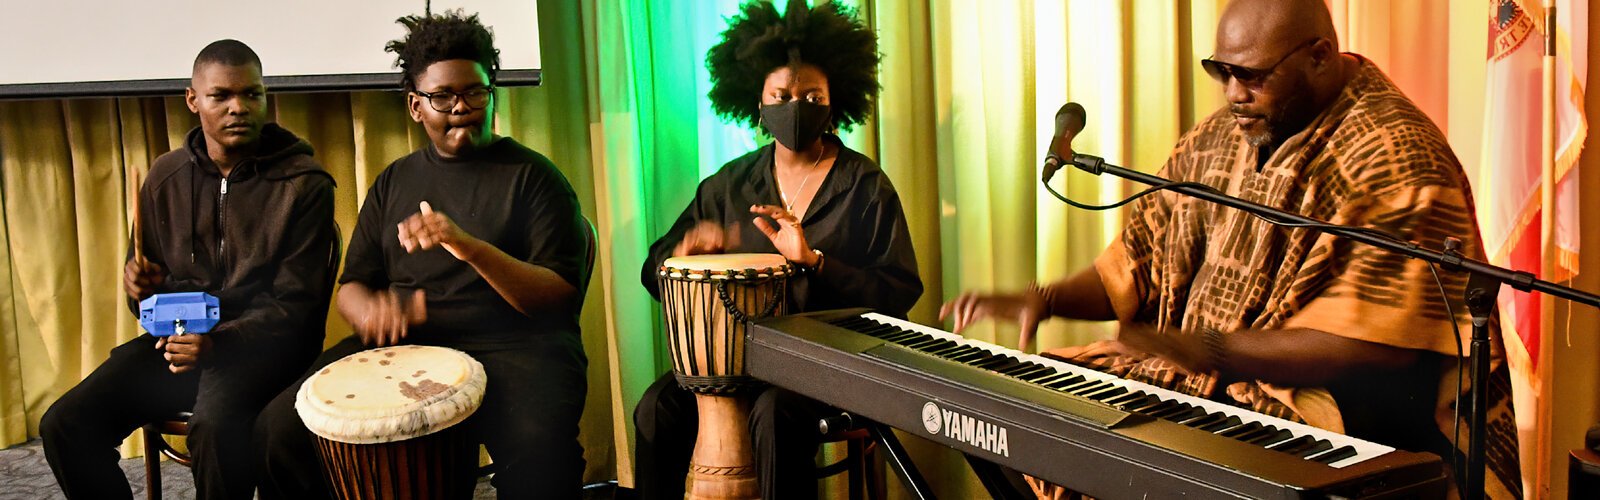  Accompanied by African drums, Maurice Allen performs at the piano during a musical interlude at the Tampa Bay History Center (TBHC) Black Month History Reception.